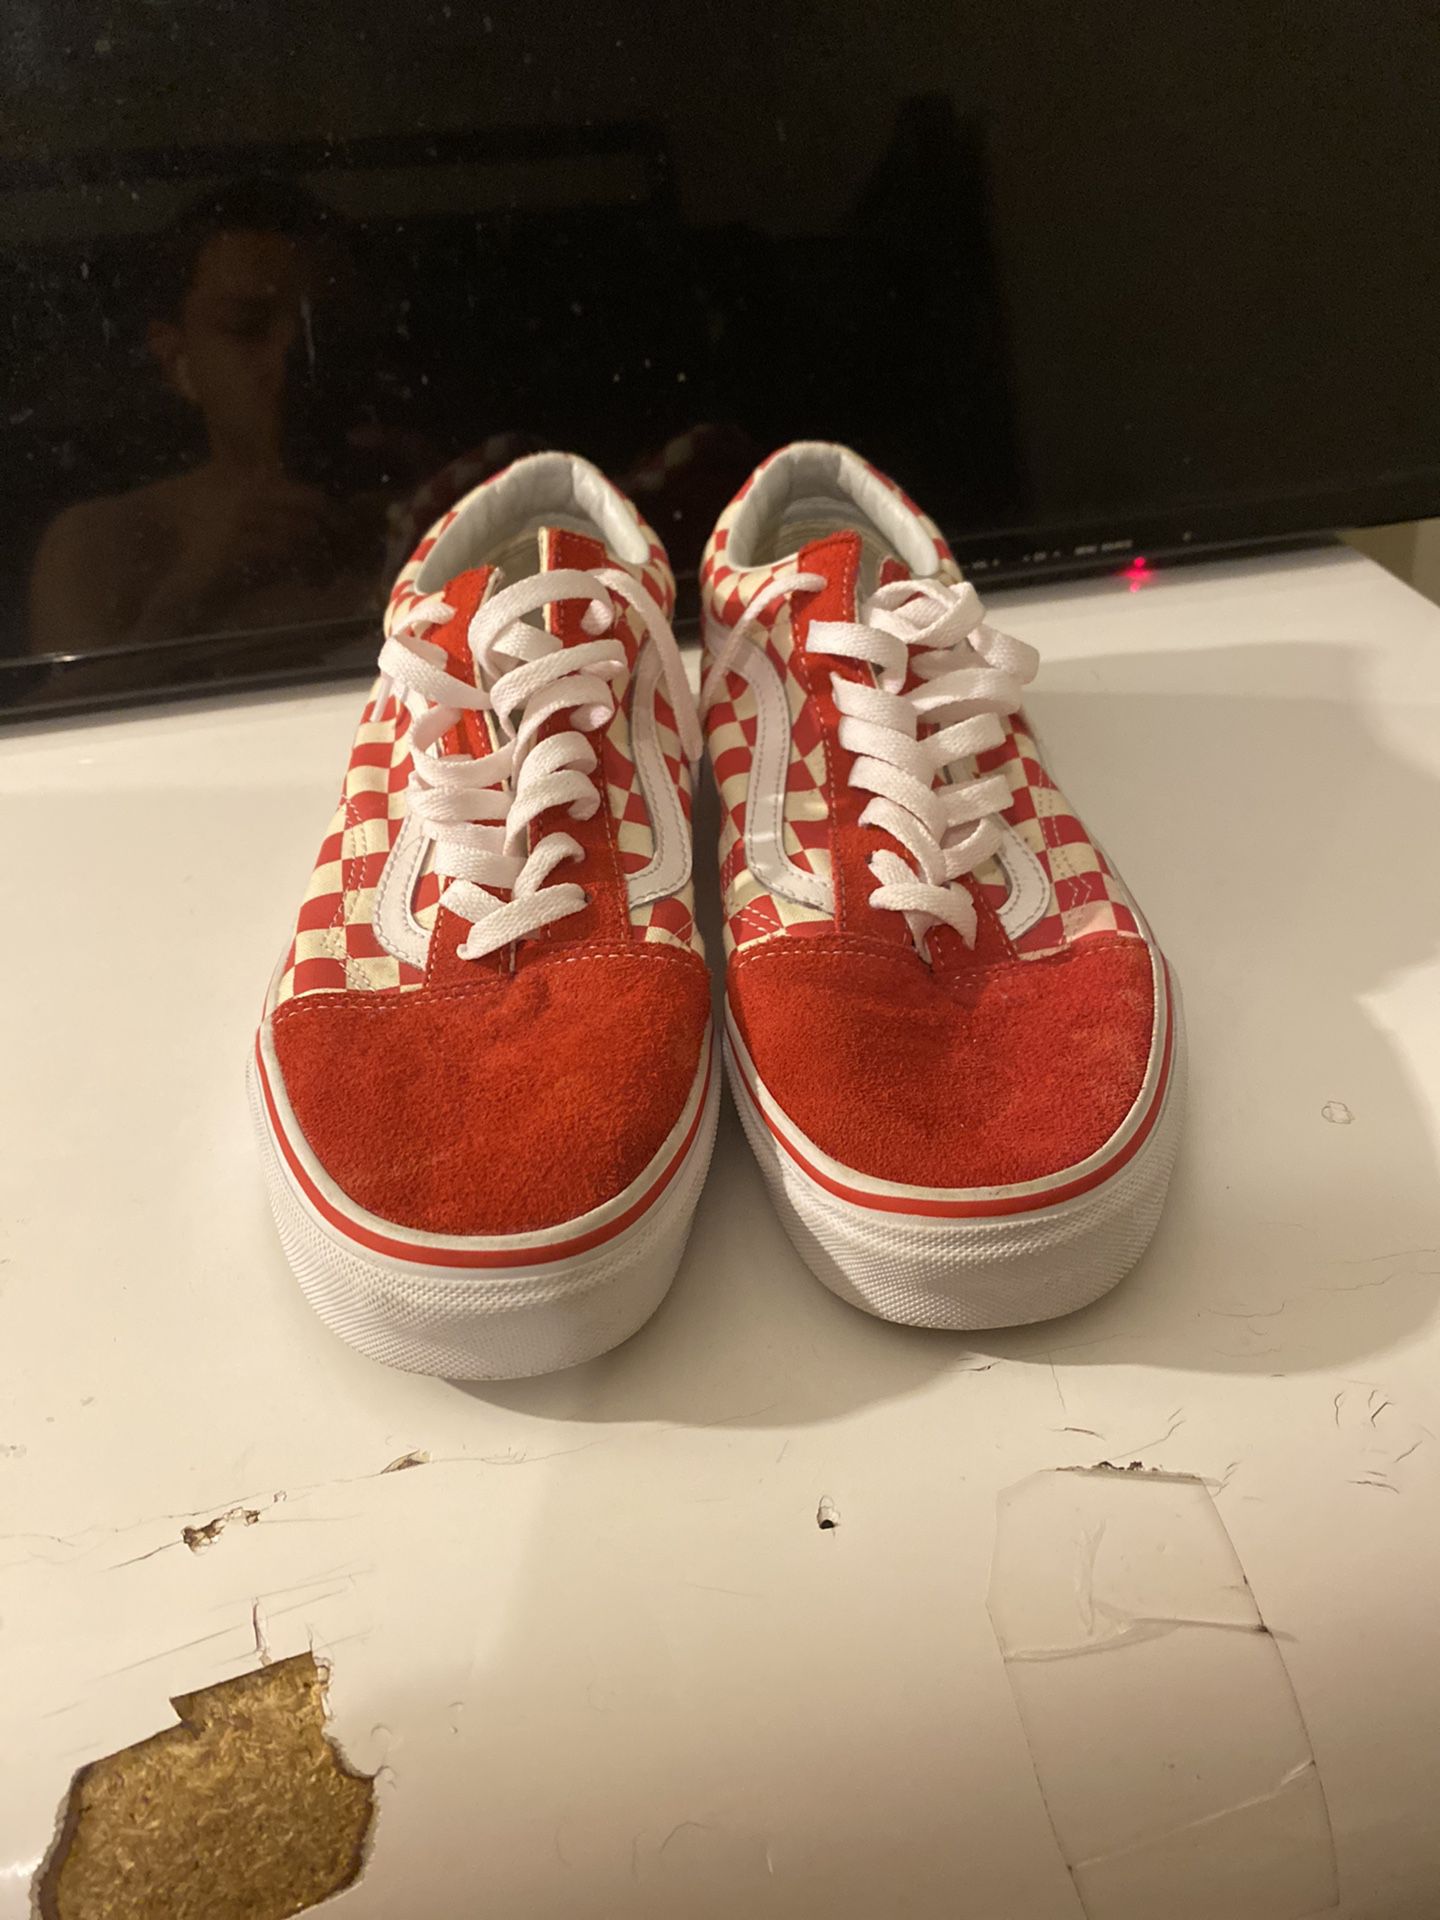 Lowtop Red and White Checkerboard Vans Size 9.5